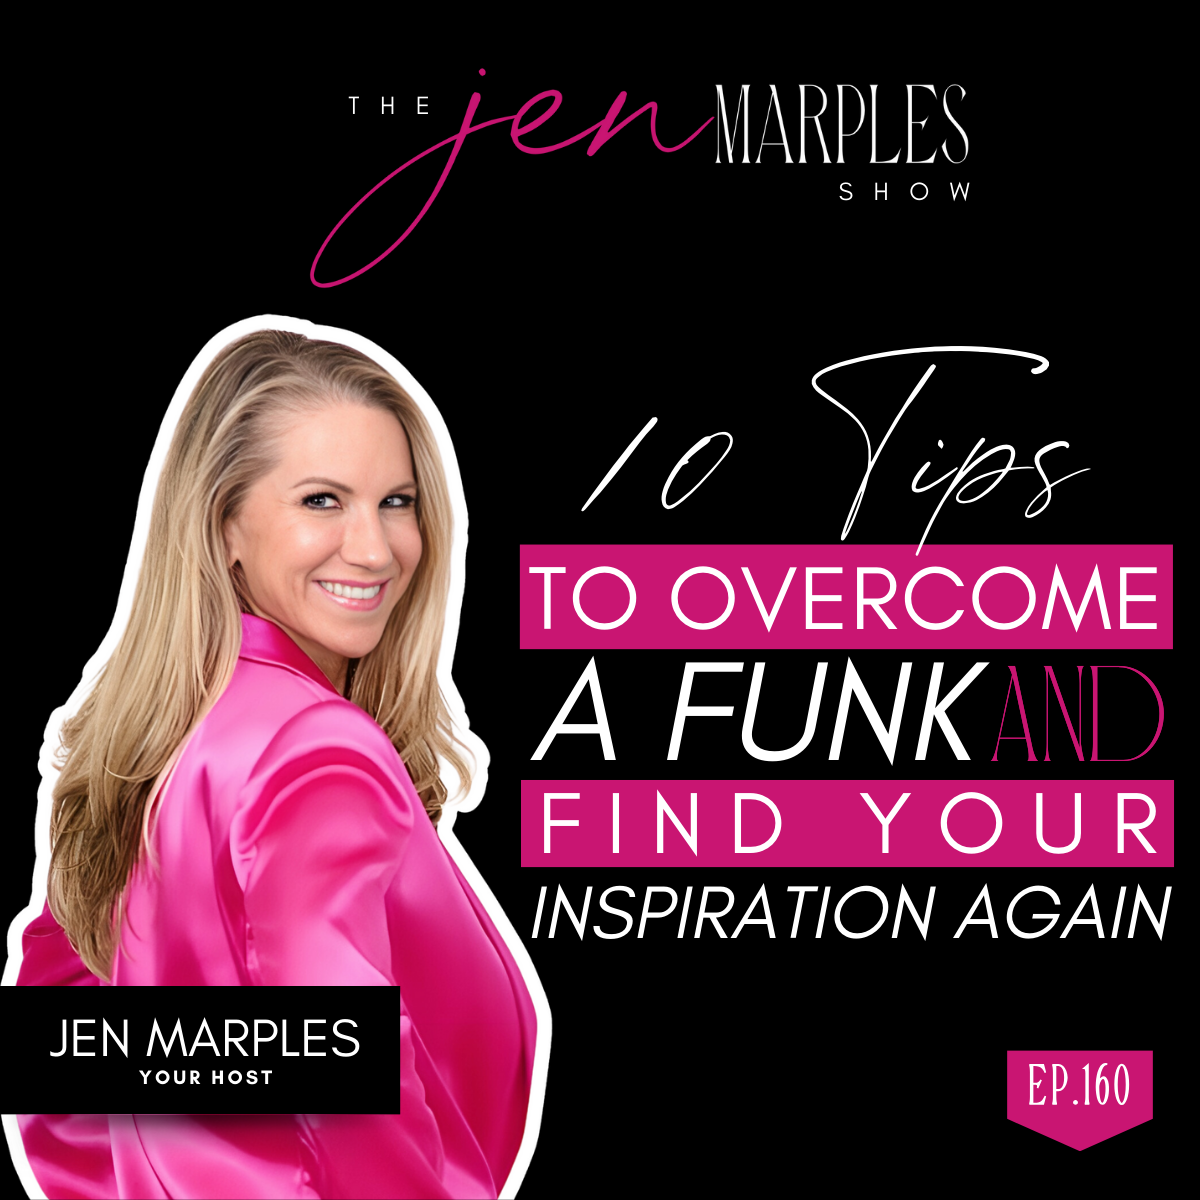 Jen's Top 10 Life and Business Tips for Midlife Success